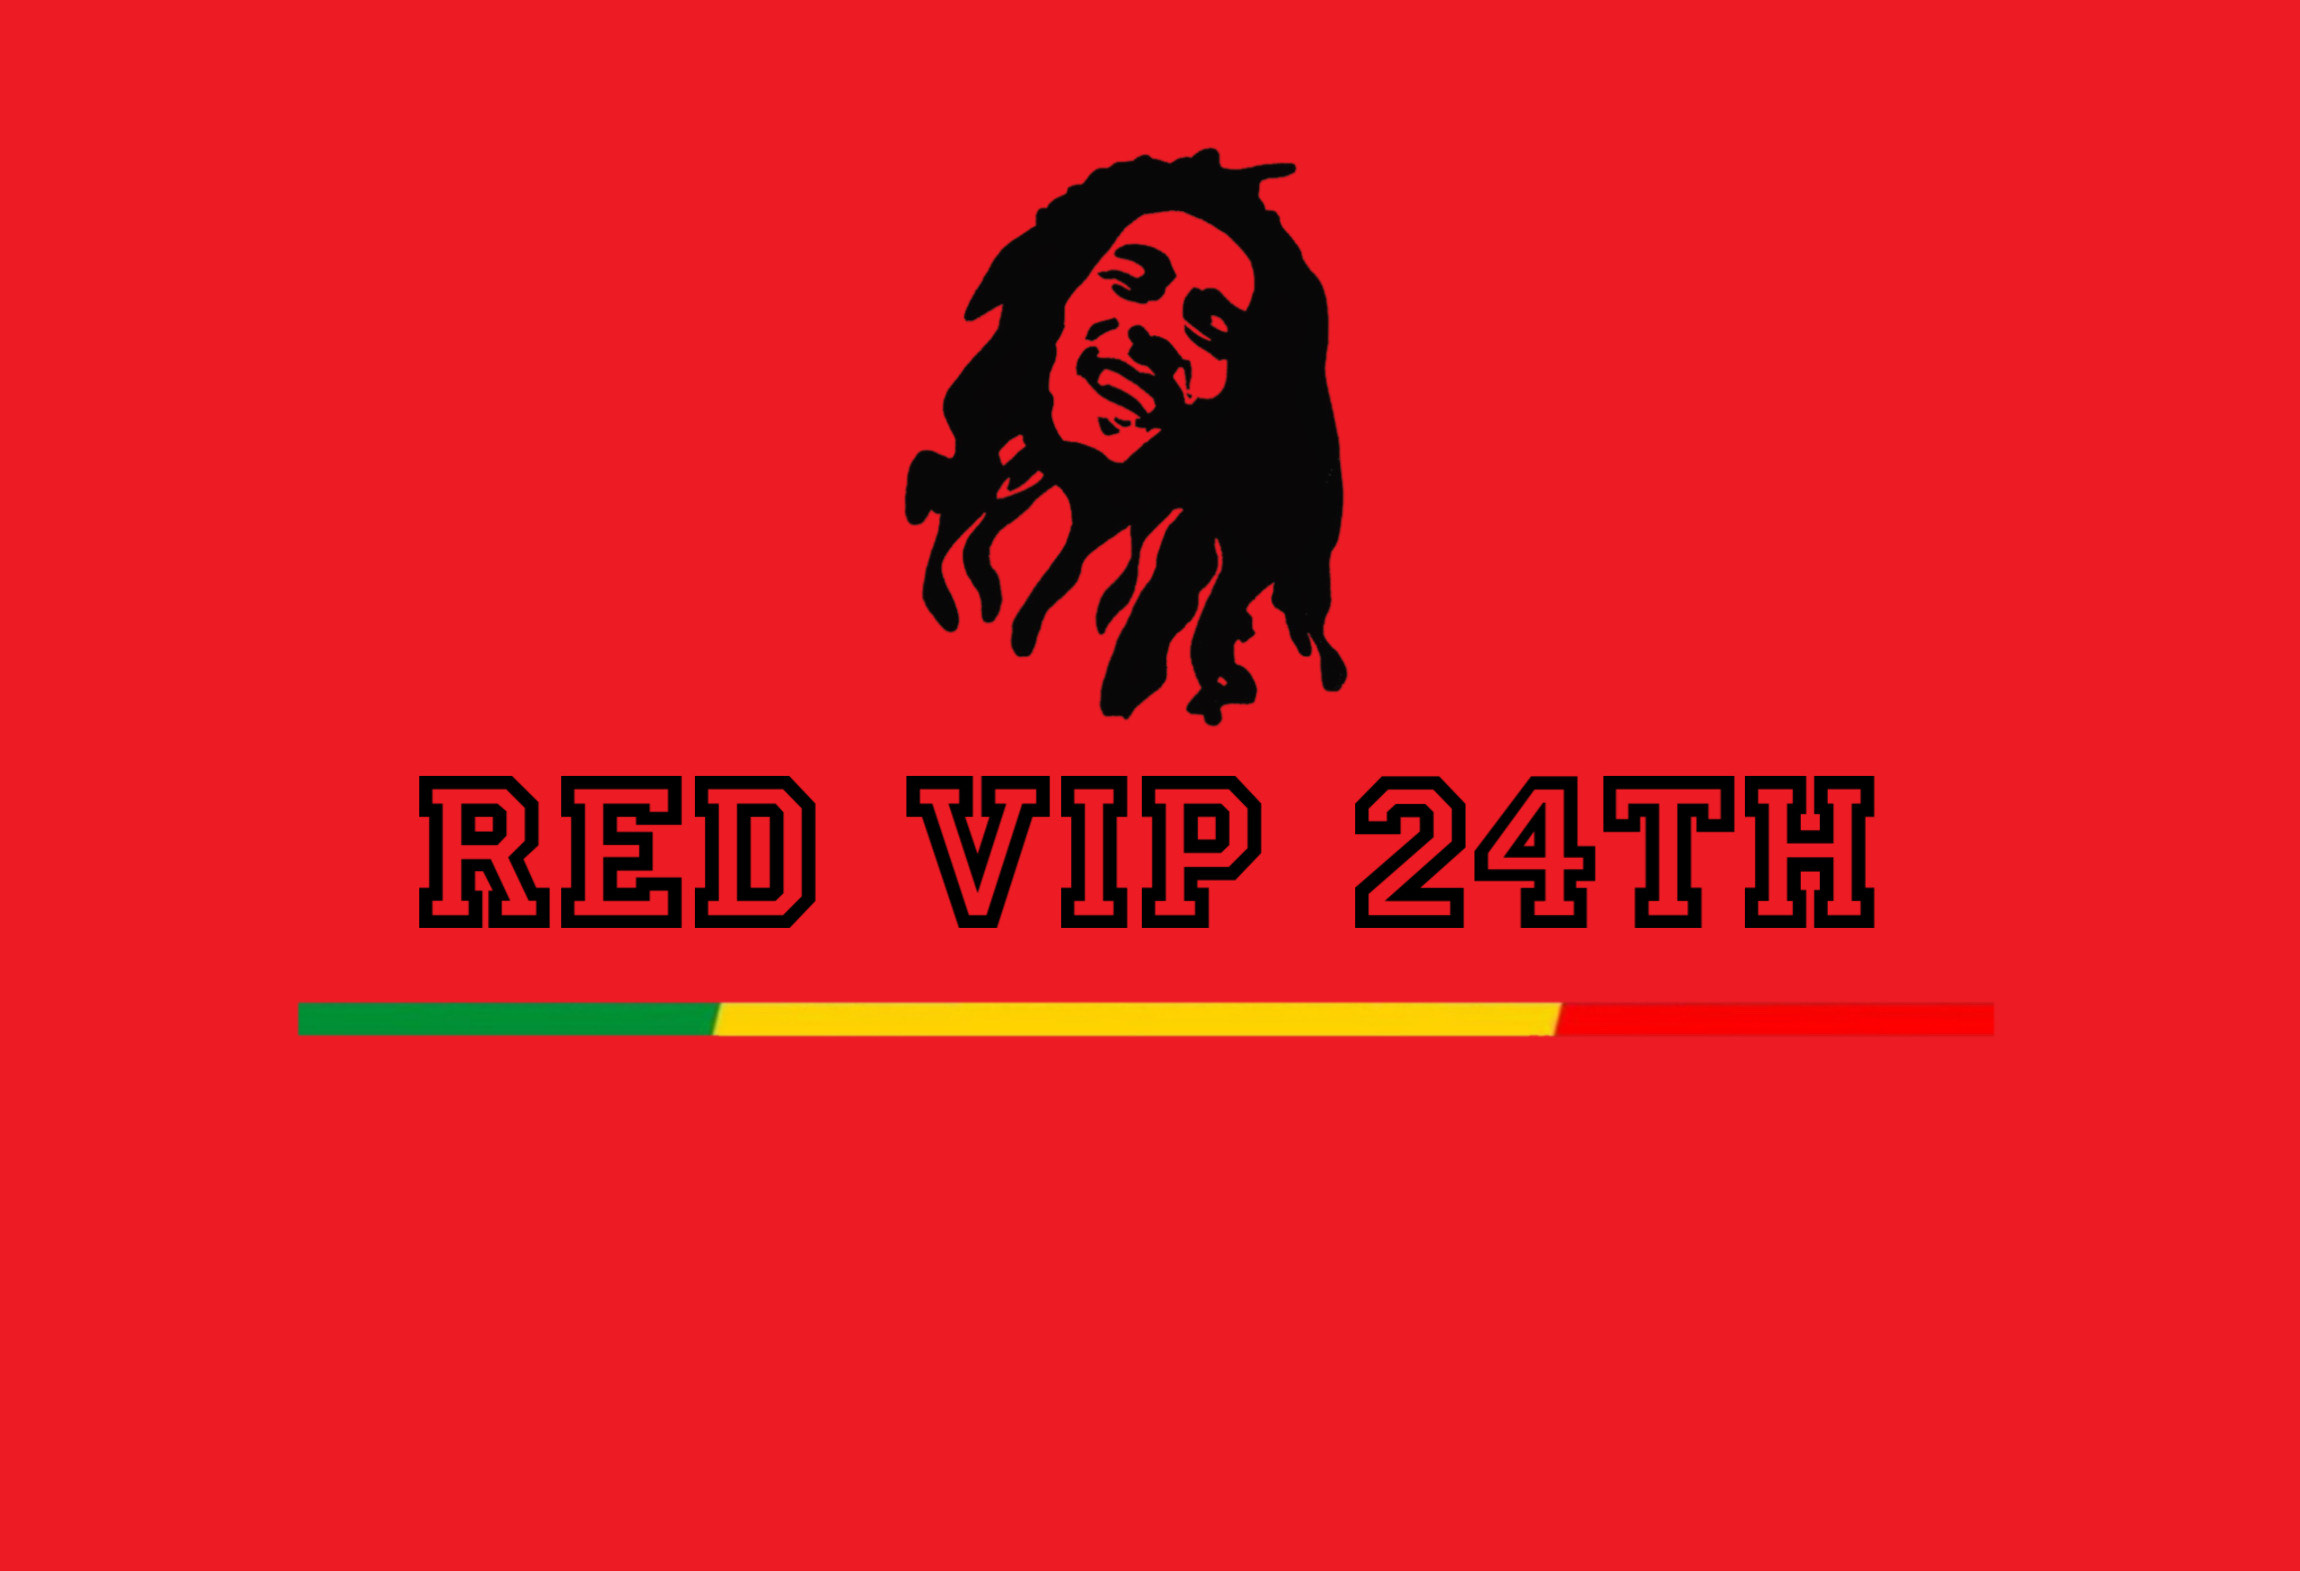 RED VIP 24TH